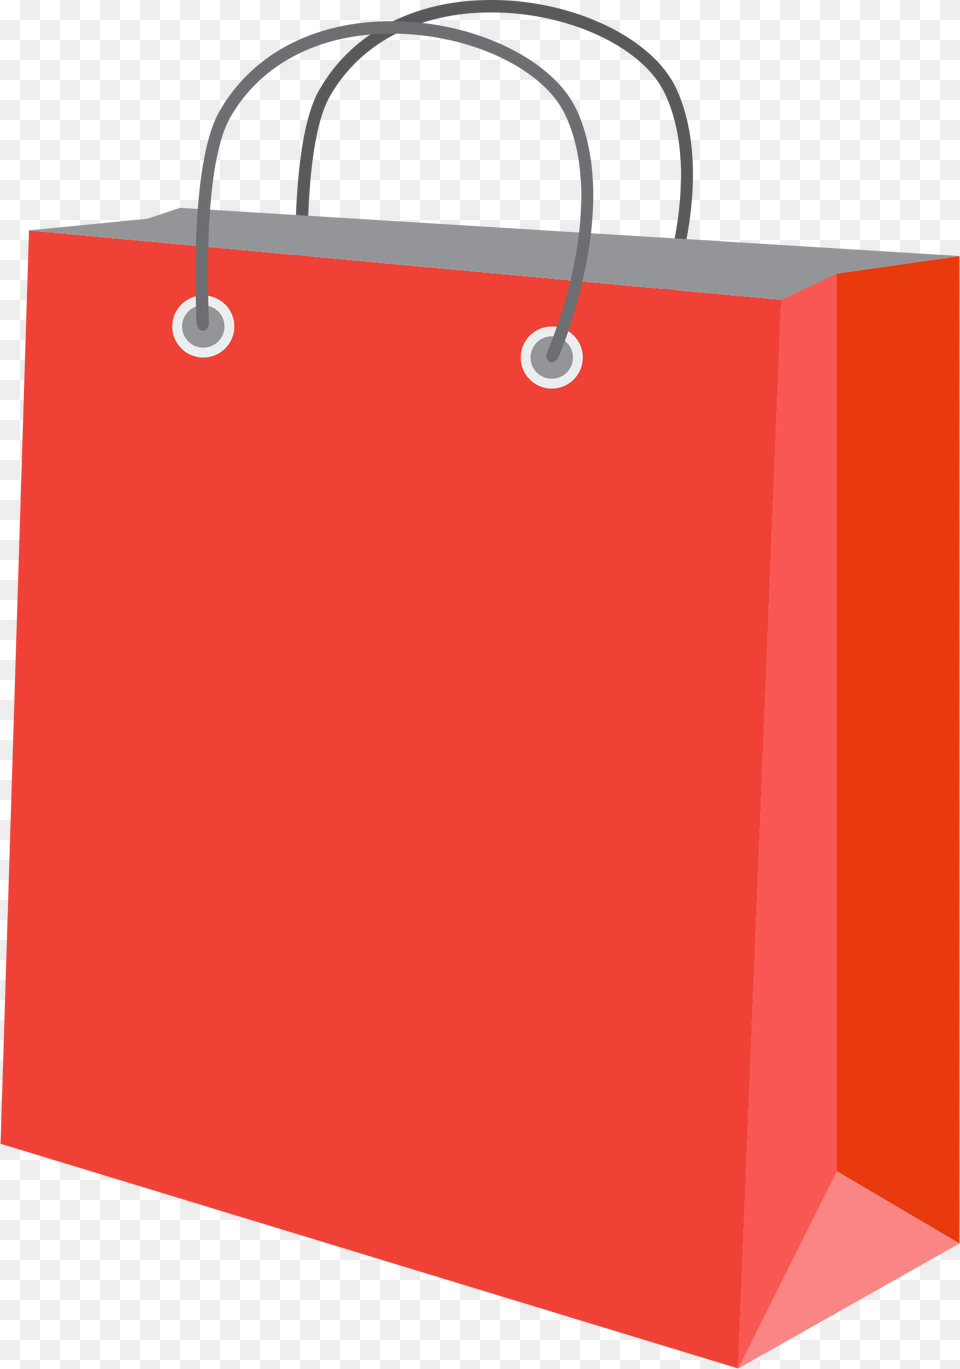 This Icons Design Of Red Paper Bag, Shopping Bag, Tote Bag Free Png Download